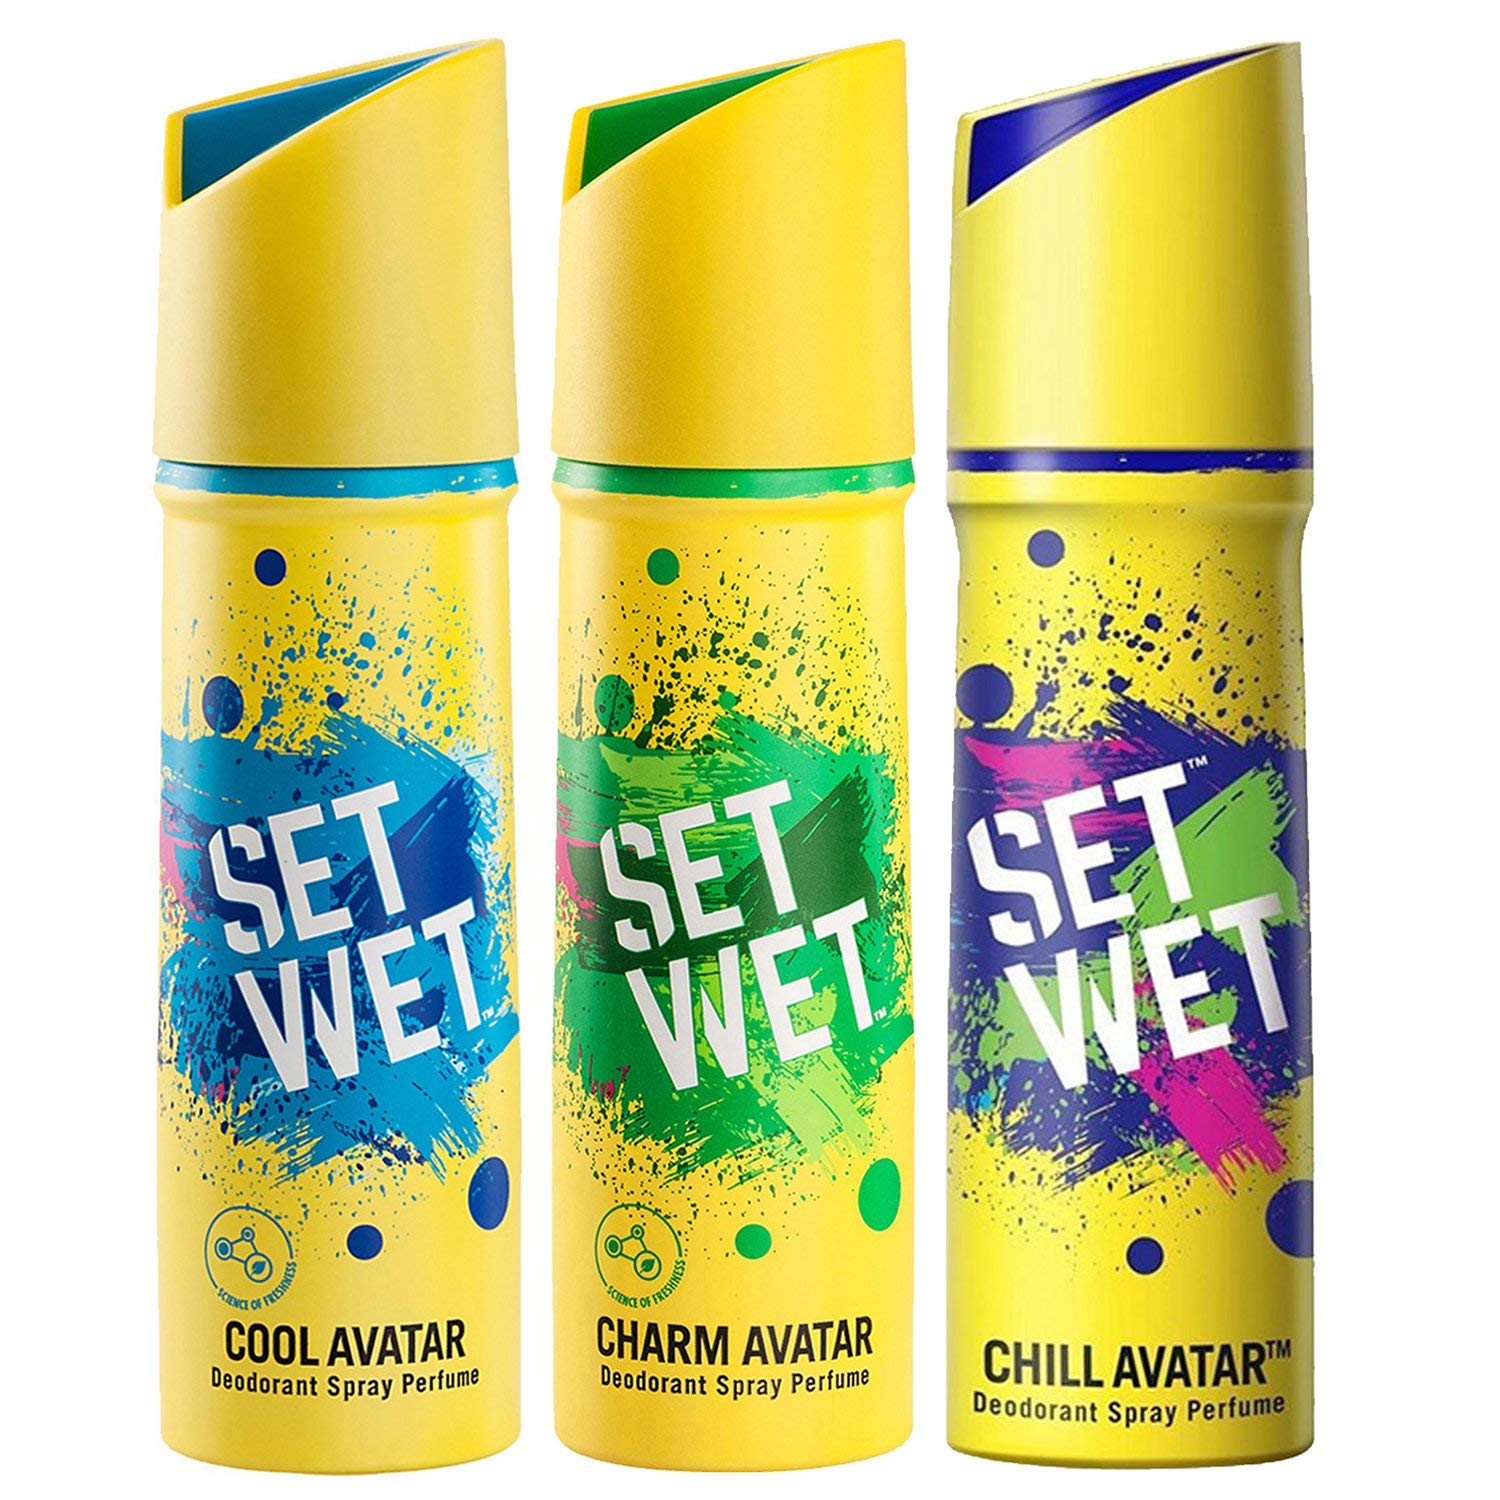 Amazon- Buy Set Wet Deodorant Spray Perfume, 150ml (Cool, Charm and Chill Avatar, Pack of 3) at Rs 240